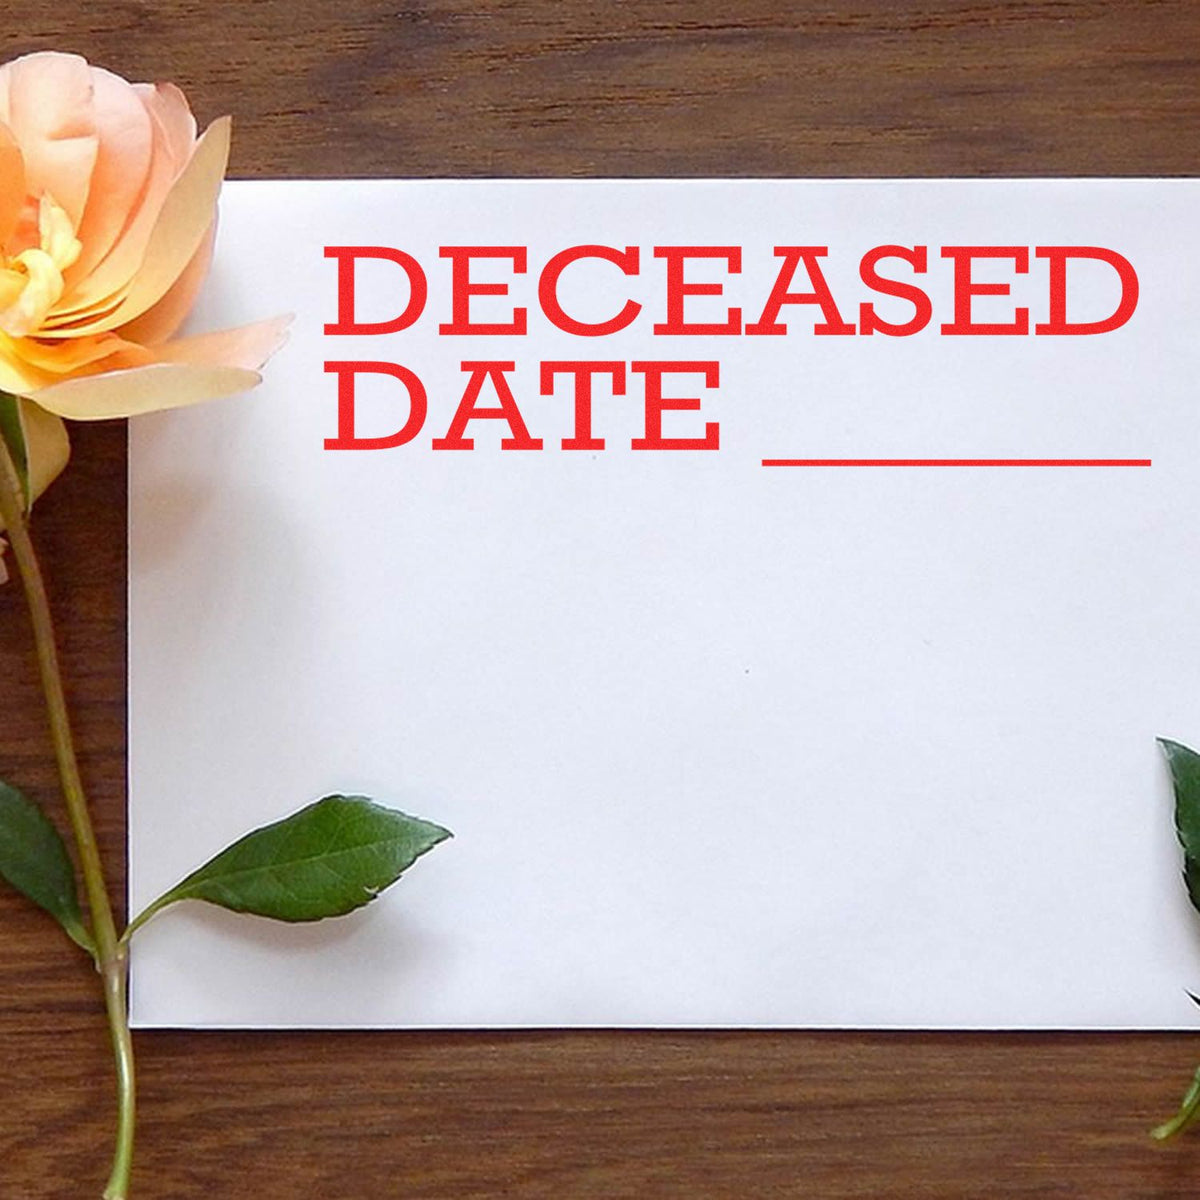 Deceased Date Rubber Stamp In Use Photo